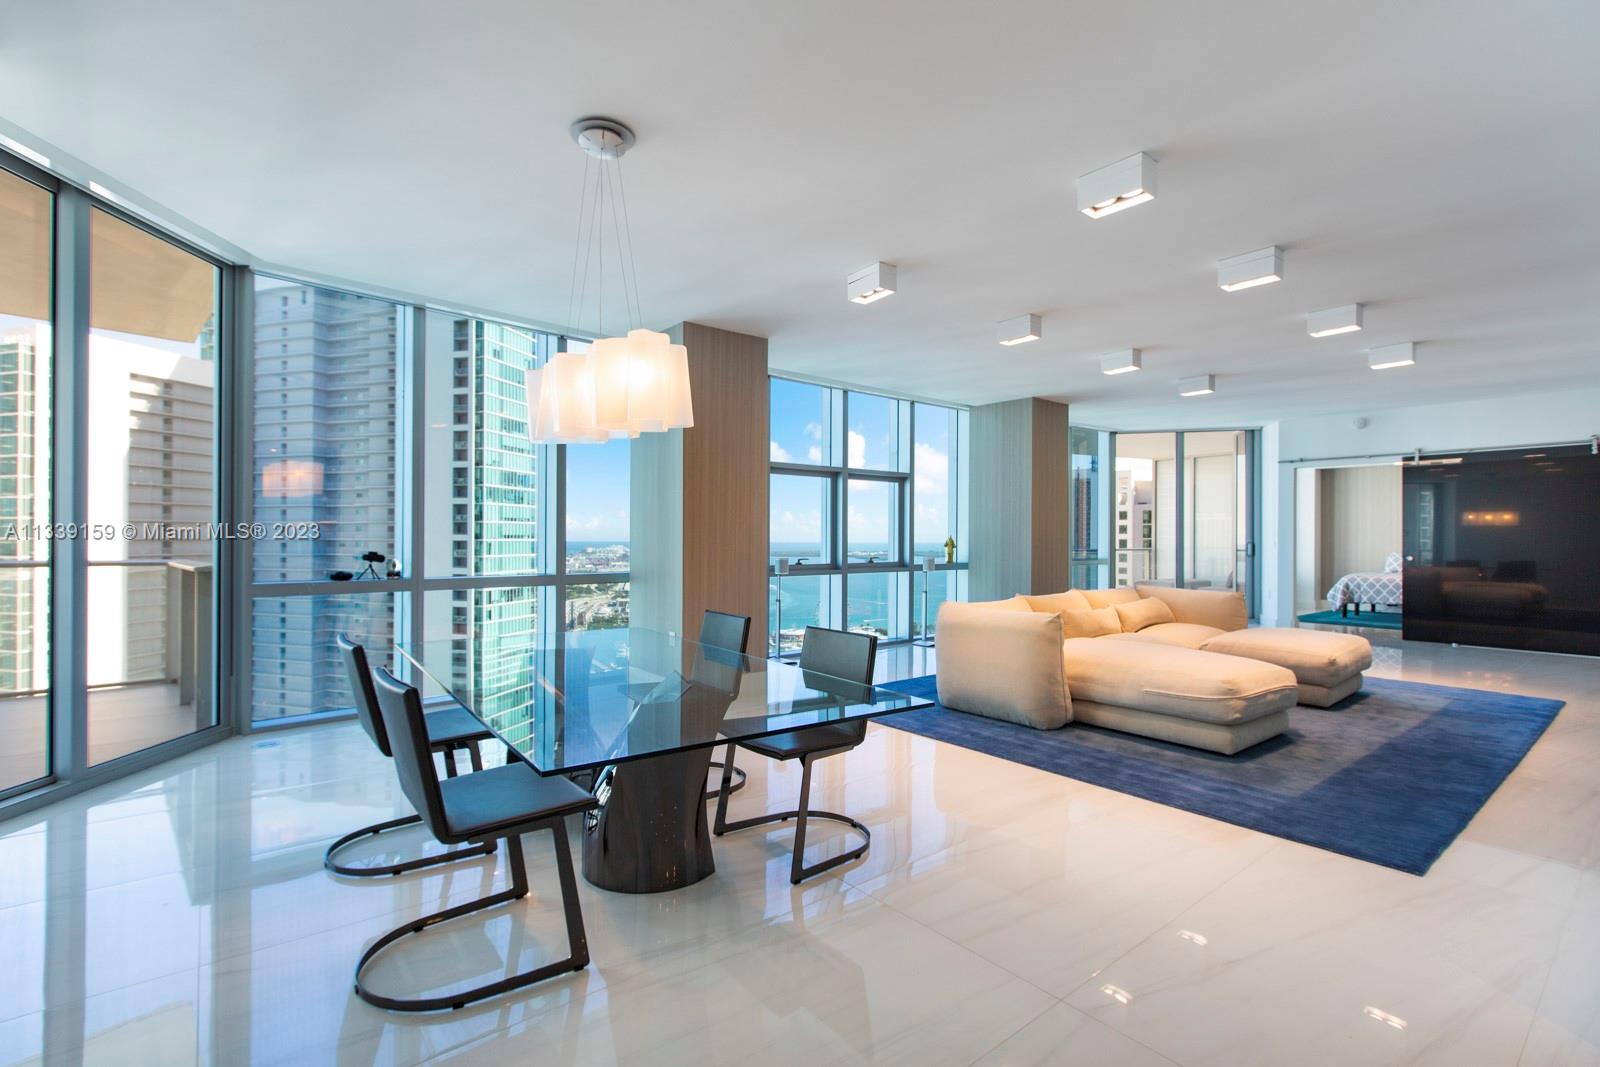 Available for one year lease. A custom residence with over 3,000 SF of interior space at Paramount Miami WorldCenter. This combined residence offers large entertaining space, lots of natural light, two primary bedrooms with ensuite bathrooms and two balconies. Third room is currently open and used as an office. Designed by Steven G with redesigned kitchen, Poliform closets, motorized shades, large Italian porcelain floors, contemporary lighting, custom built-ins and bar. Two self-parking spaces included. Building offers an amenity rich environment including multiple pools, gyms, spa, jam room, media room, soccer and more. Conveniently located next to museums, park, arena and Brightline station and restaurants.